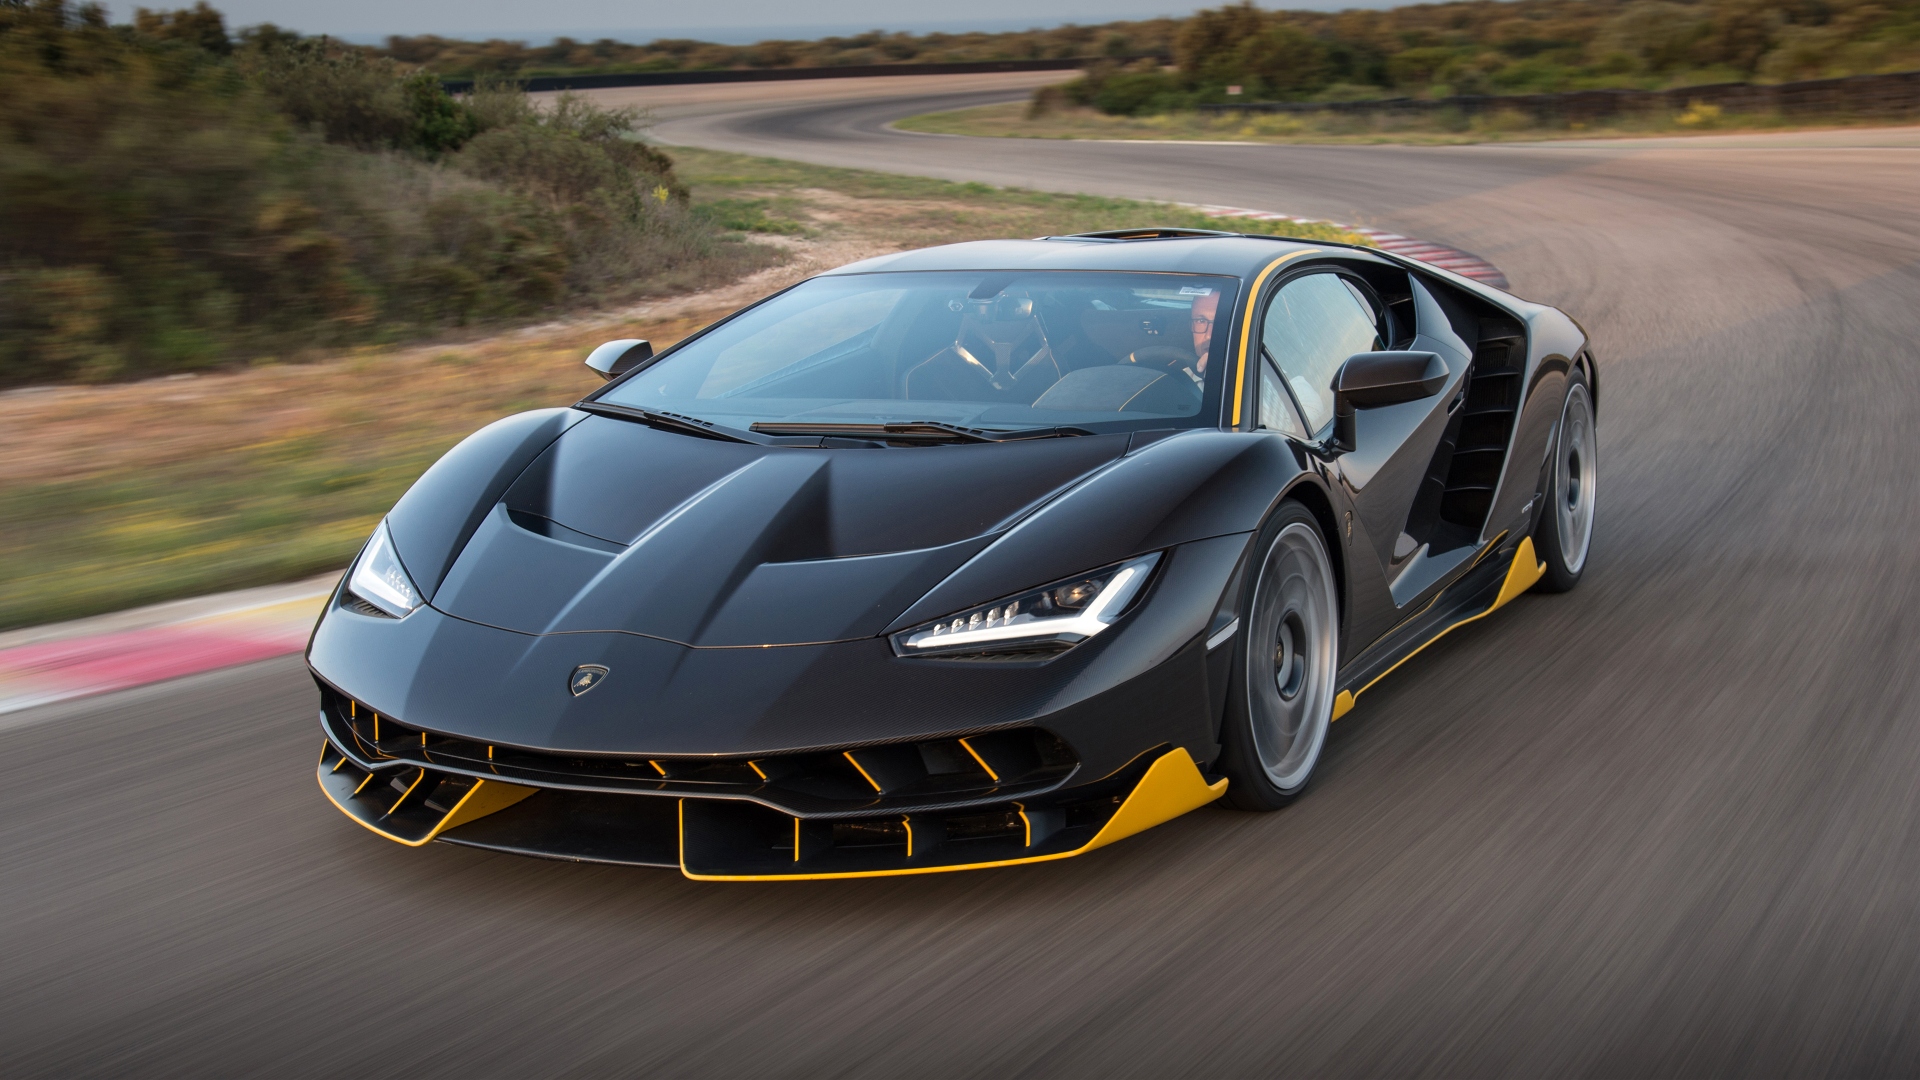 Lamborghini: 0-60 time, 1/4 Mile time, Power & Top Speed (Every Model)